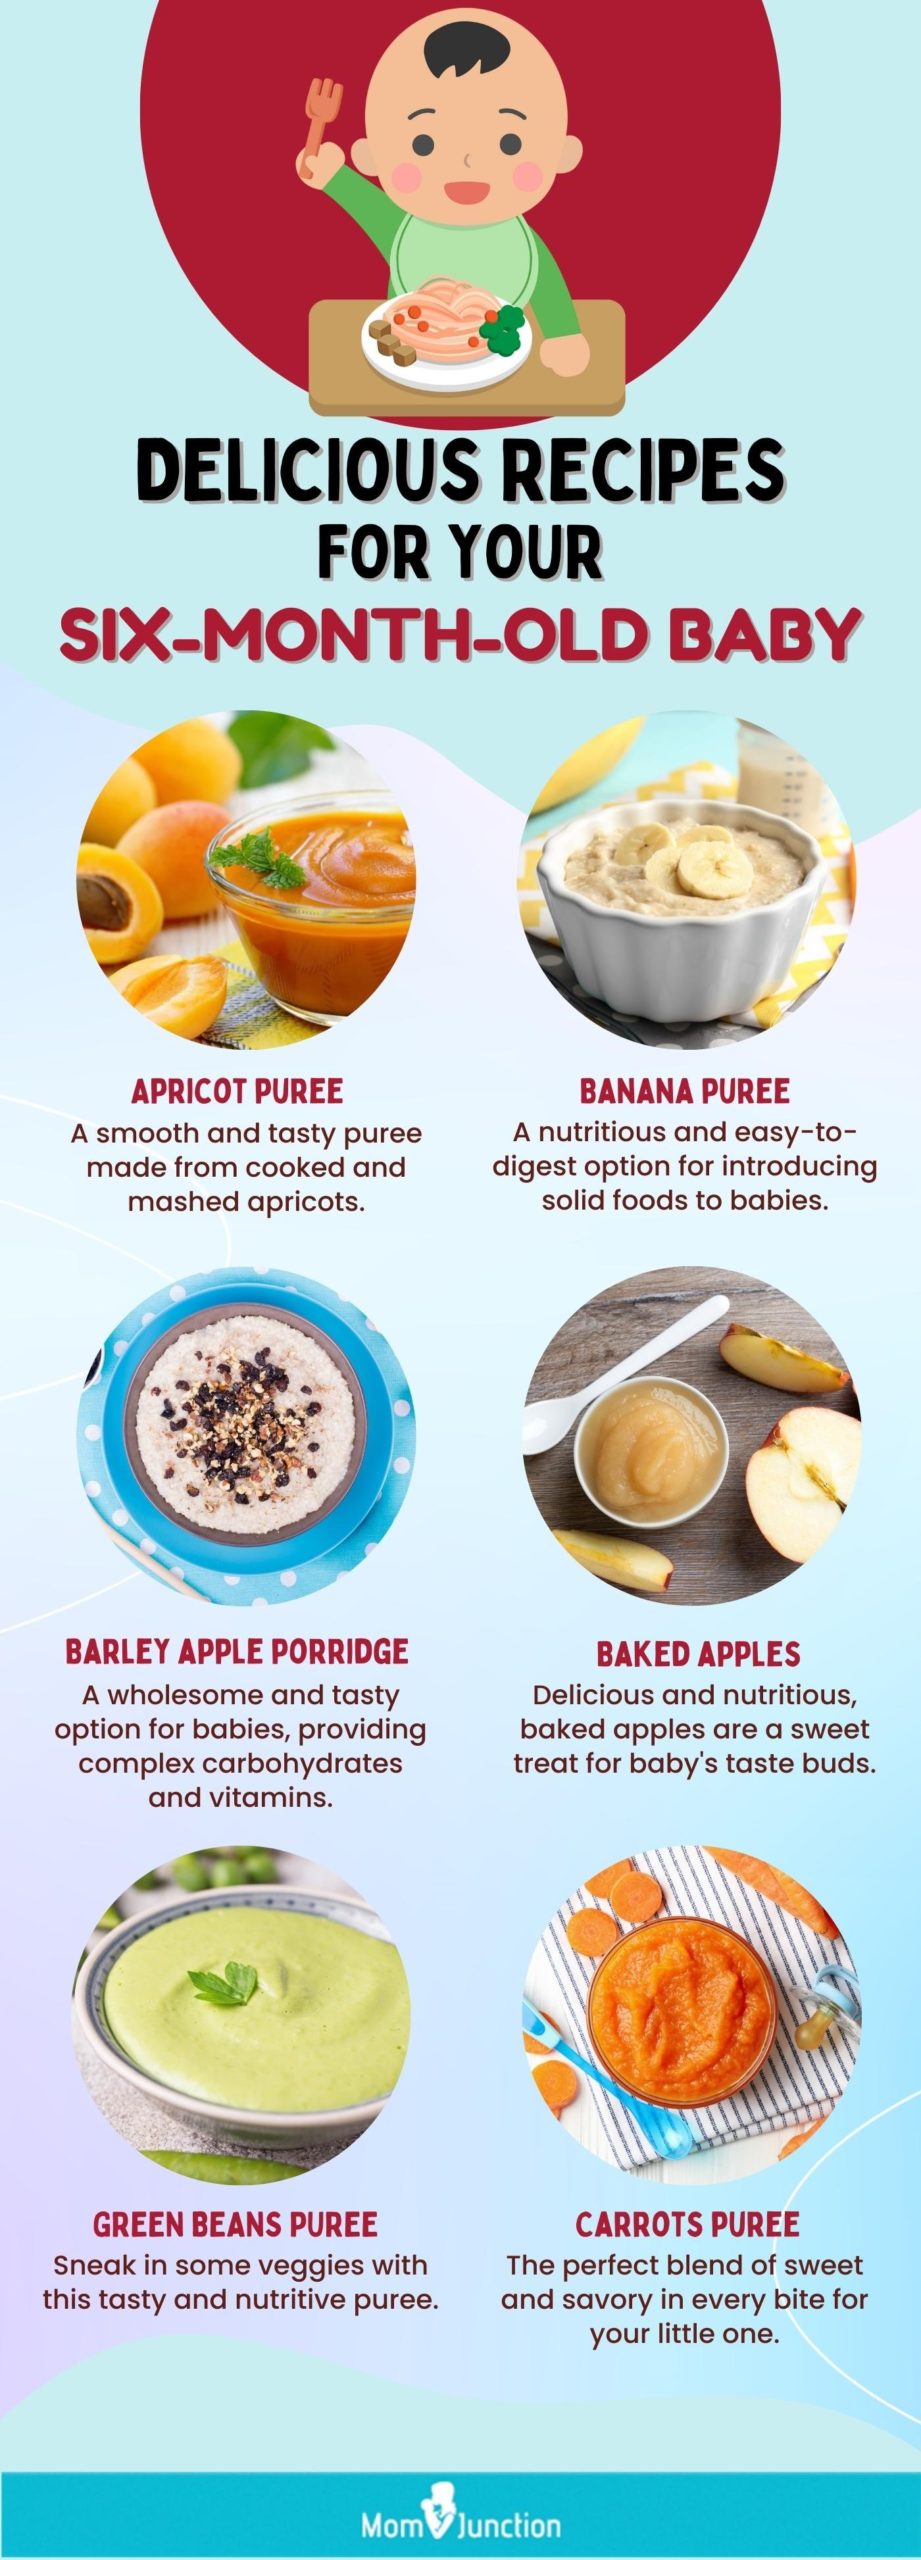 delicious recipes for your six month old baby (infographic)